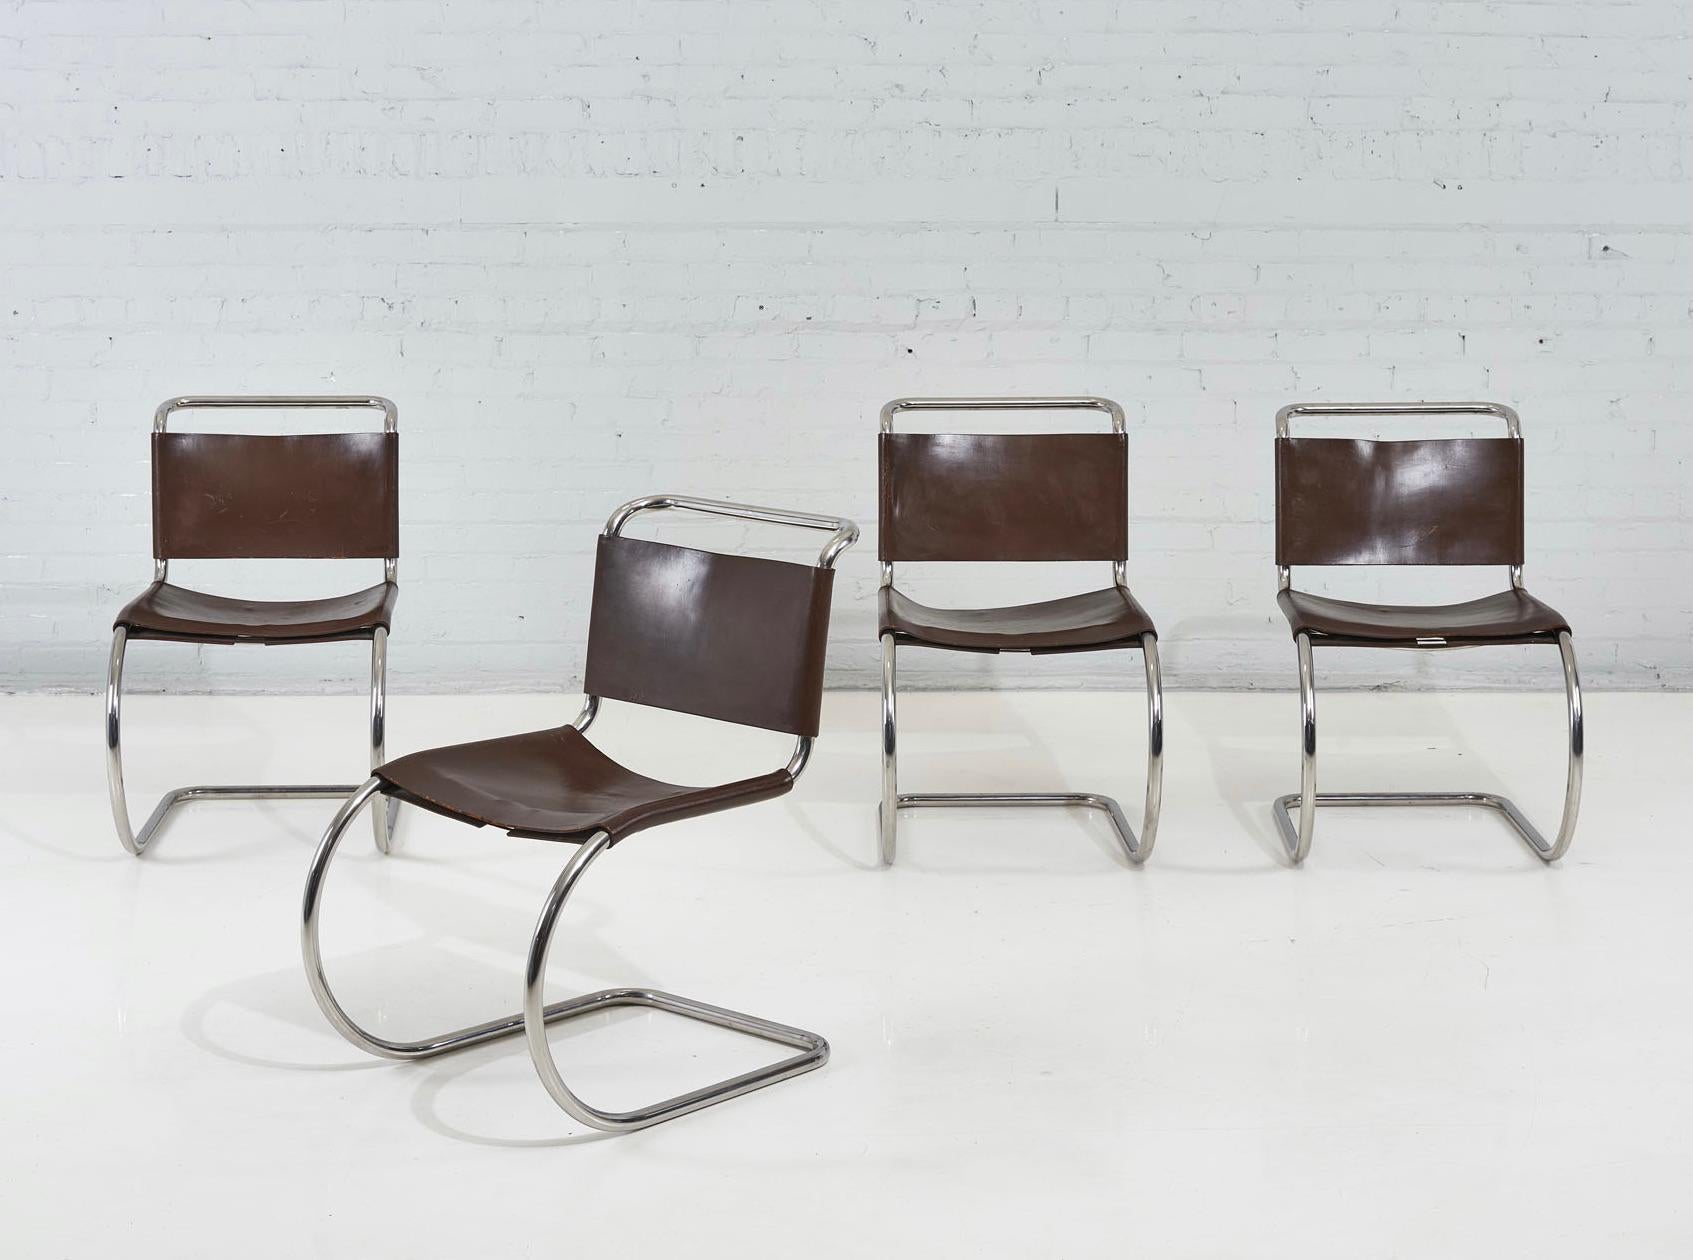 Set of 4 original 1960's MR10 dining chairs designed by Mies van der Rohe for Knoll. Original leather and stainless steel frames are all in good shape. Chairs have Earle Knoll labels.